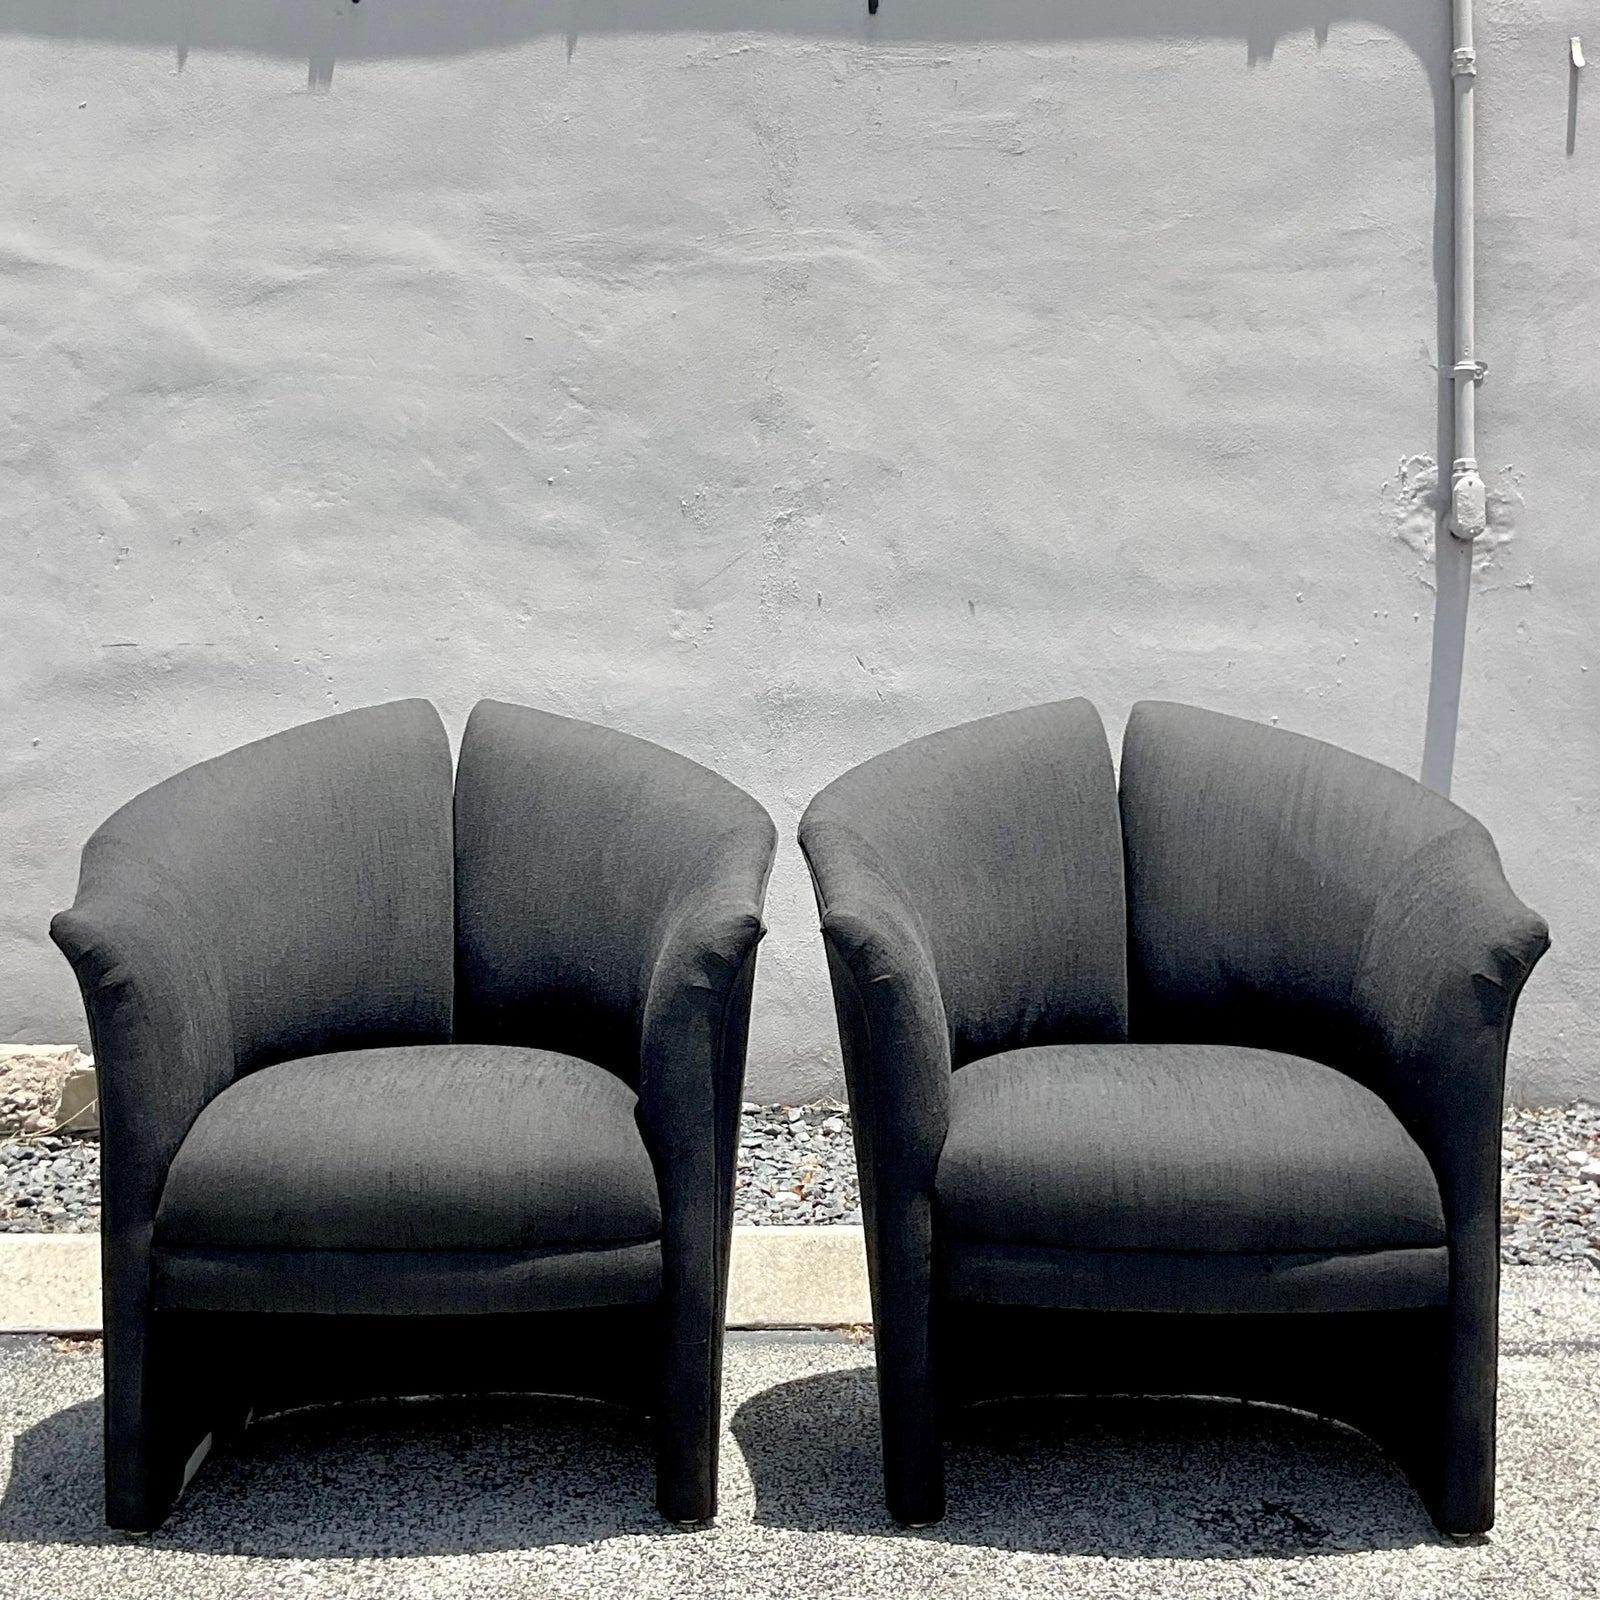 20th Century Vintage Boho Weiman Split Back Lounge Chairs - a Pair For Sale